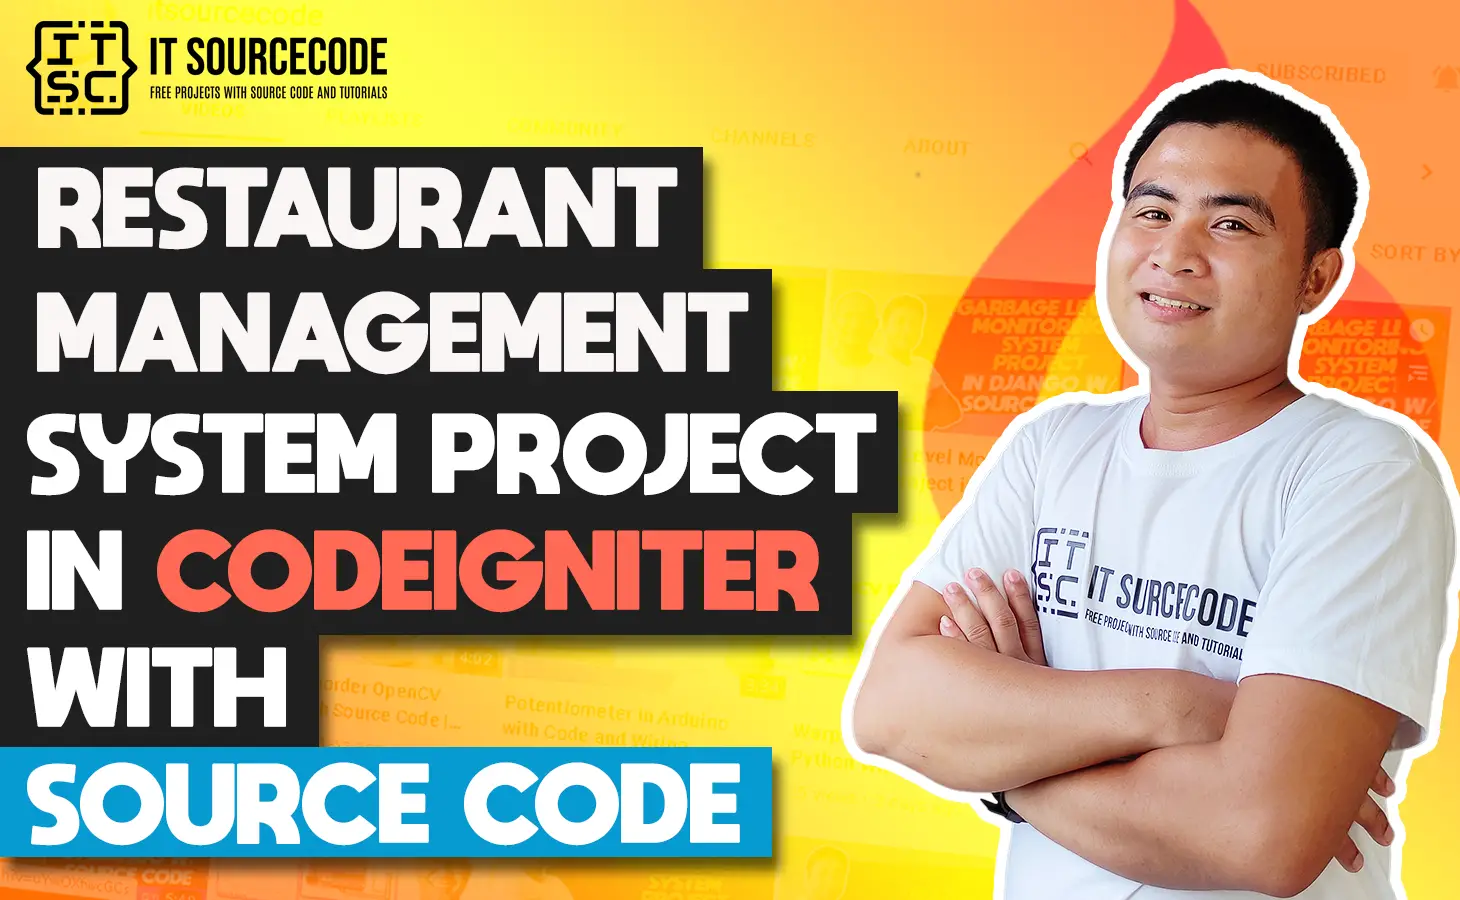 Restaurant Management System Project In CodeIgniter With Source Code